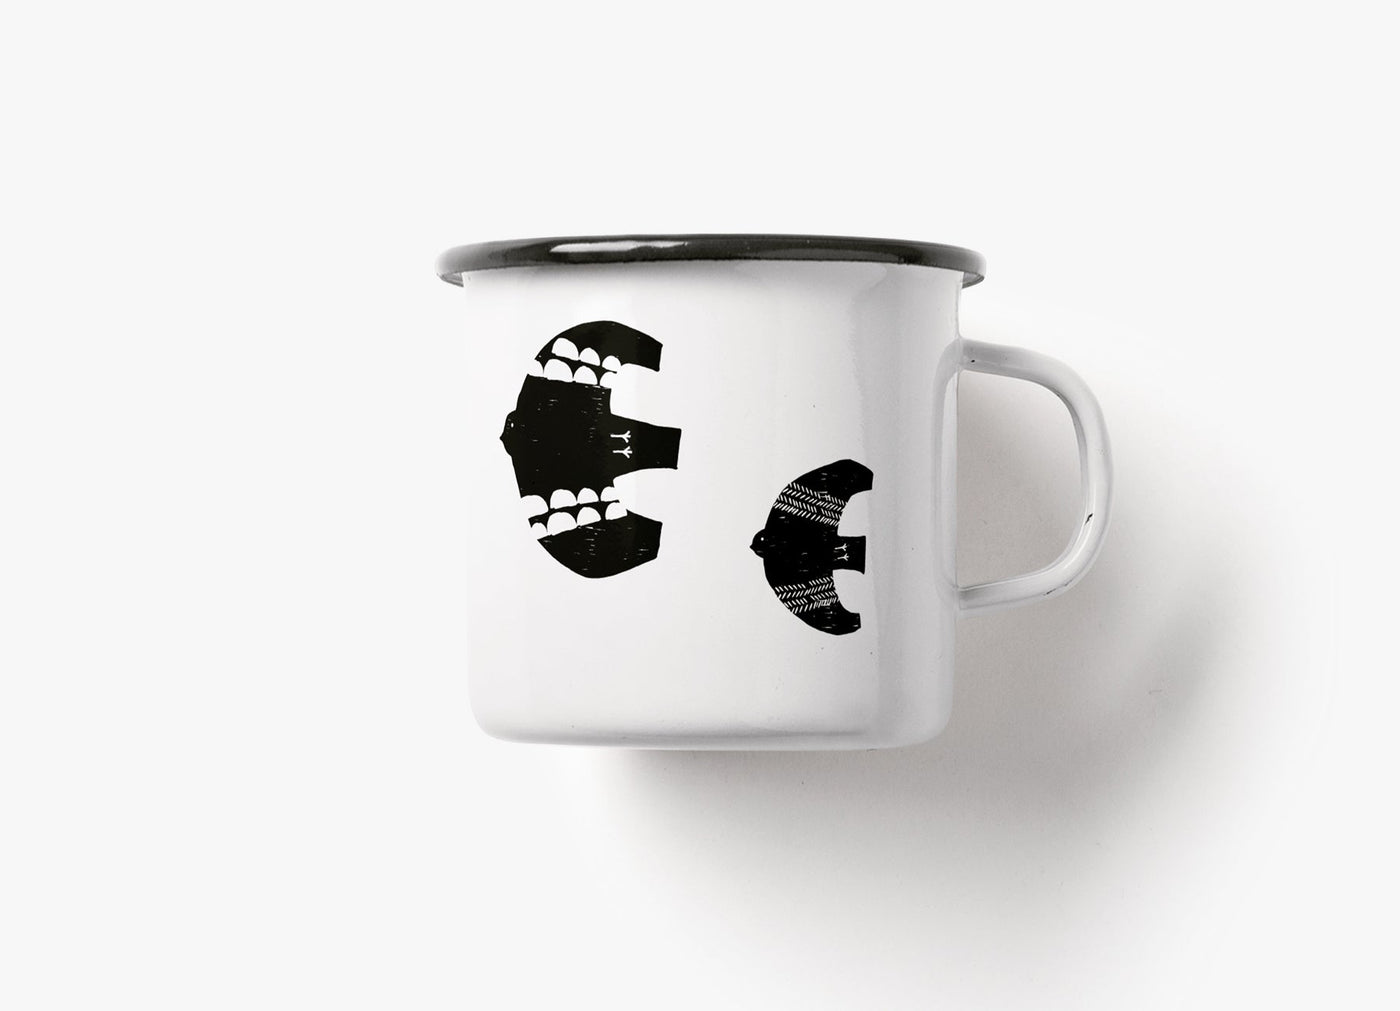 typealive - Tasse aus Emaille / Off To See The World